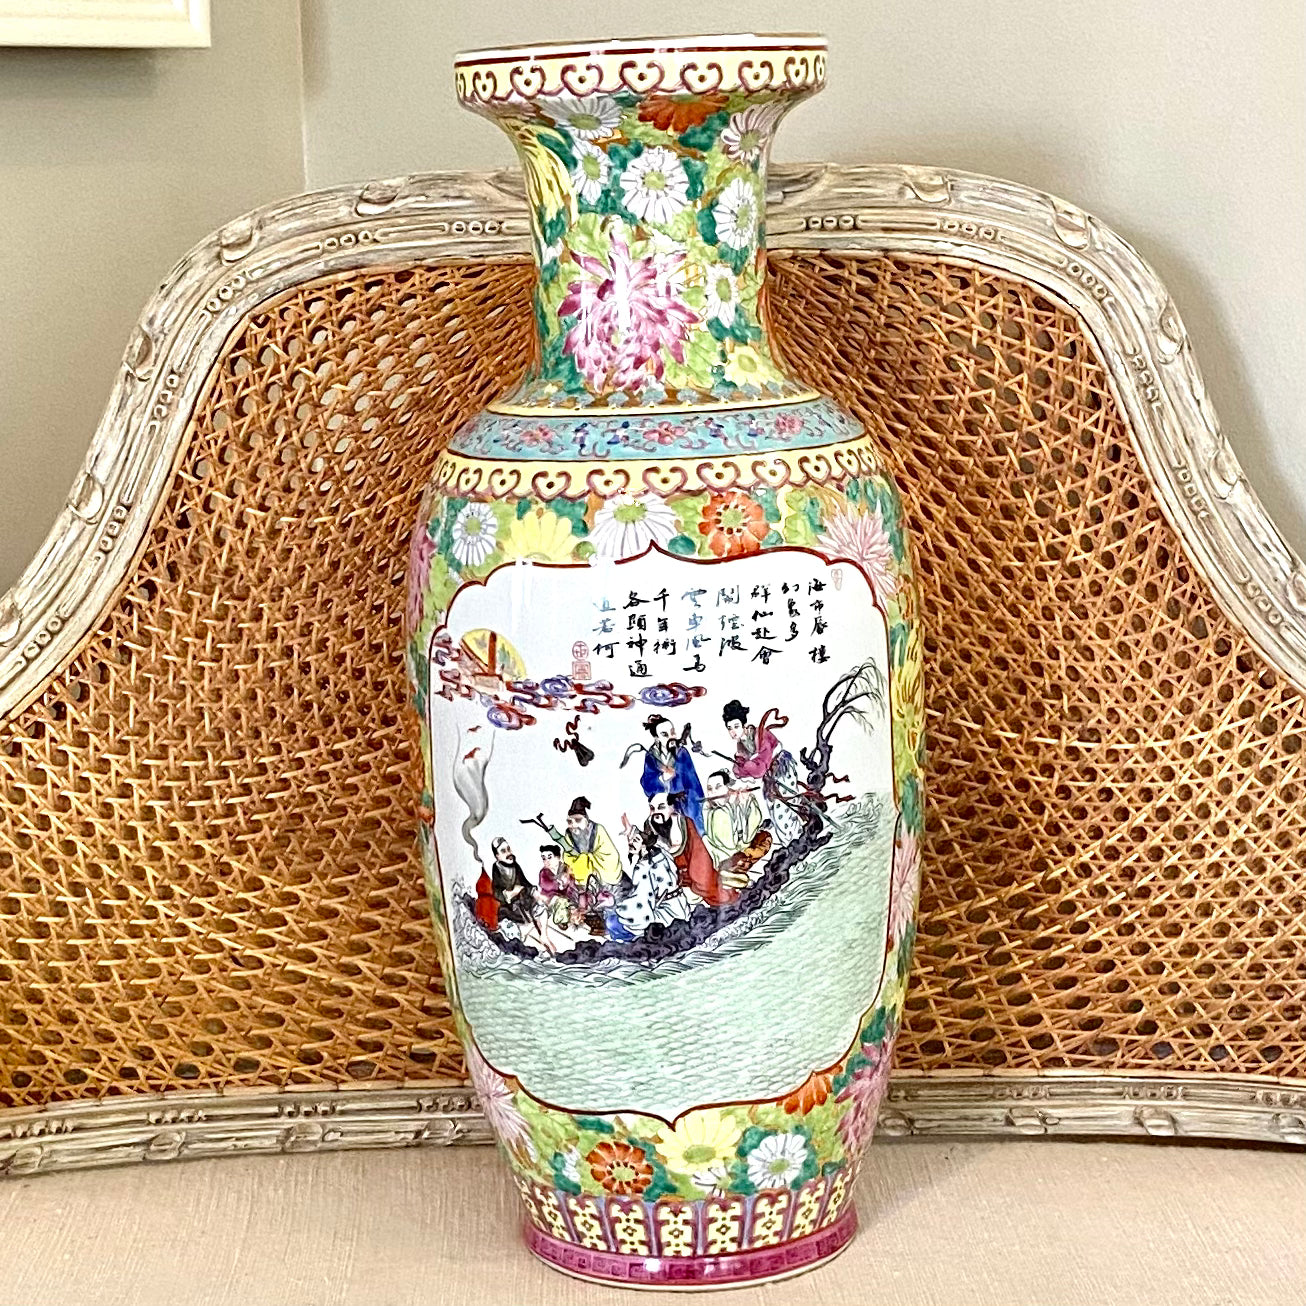 PInk perfection! 20th century vintage massive chinoiserie rose Famille floor vase.